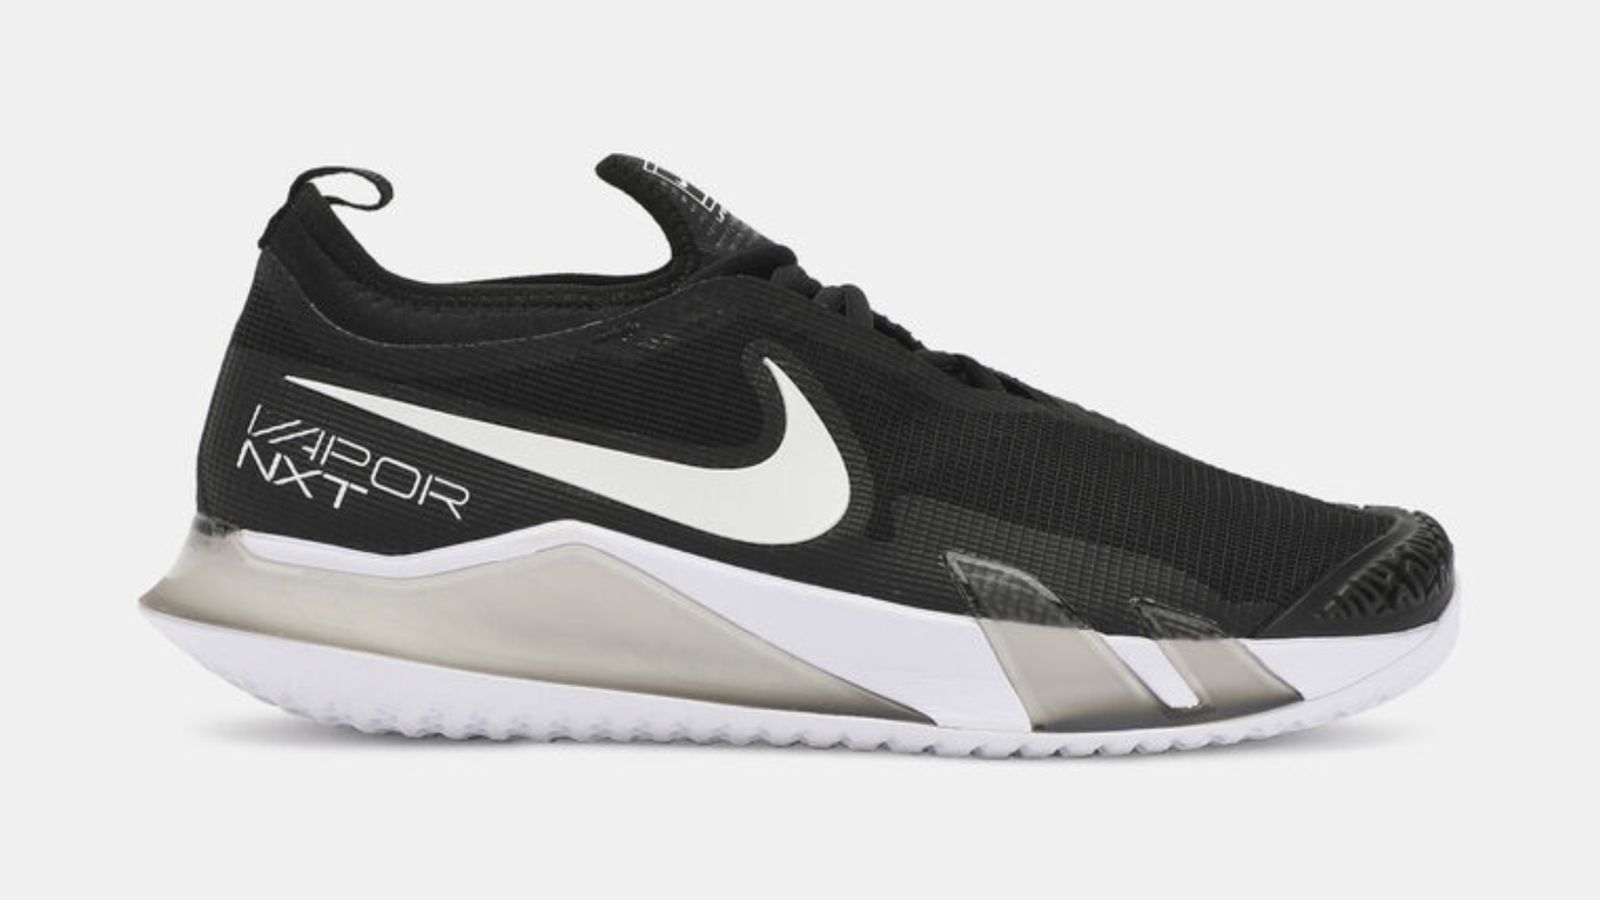 NikeCourt React Vapor NXT product image of a black tennis shoe with white branding and details.